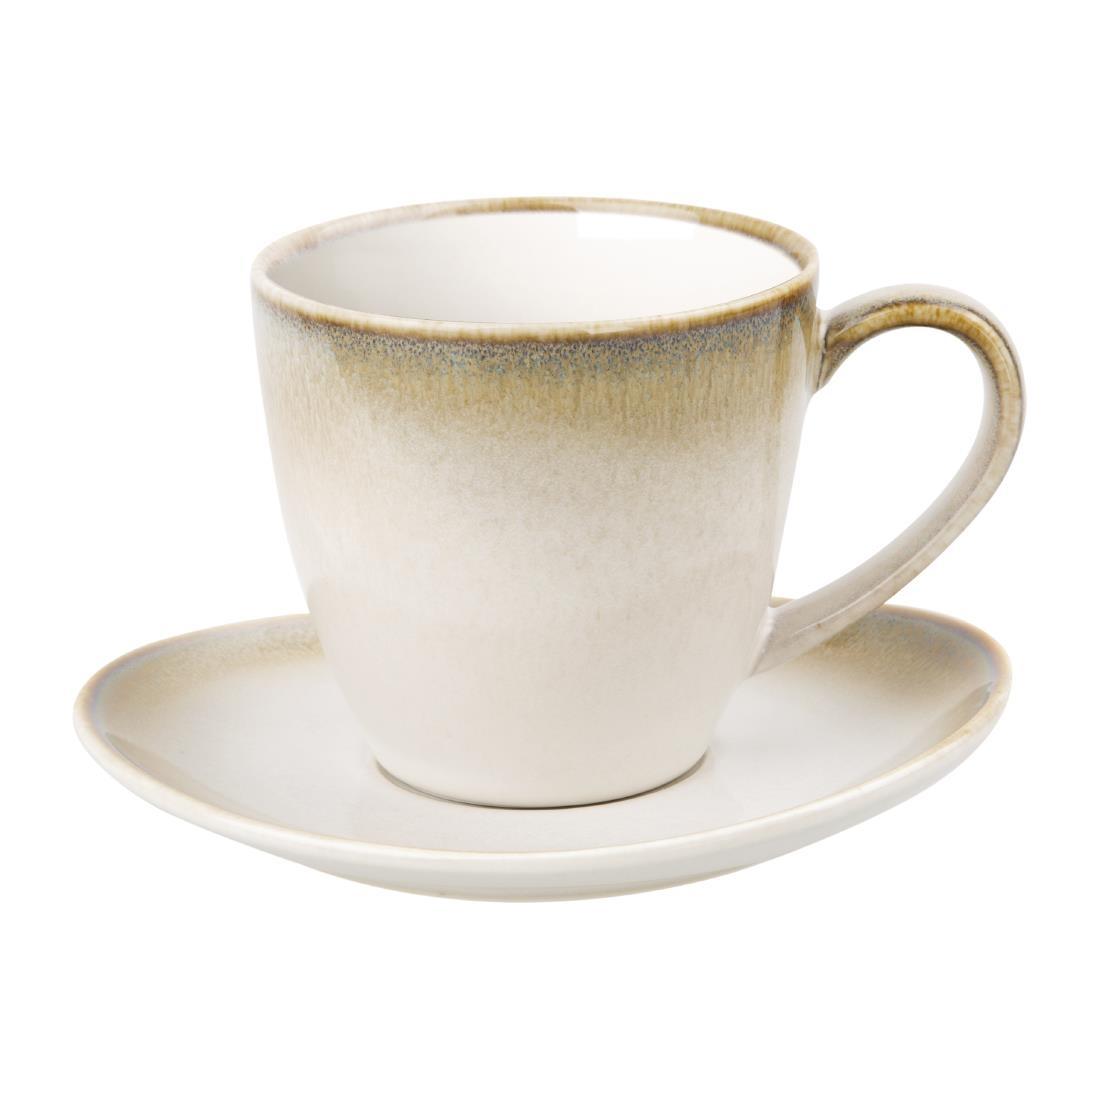 Olympia Birch Taupe Saucers 141 x 126mm (Pack of 6) - DR787  - 3